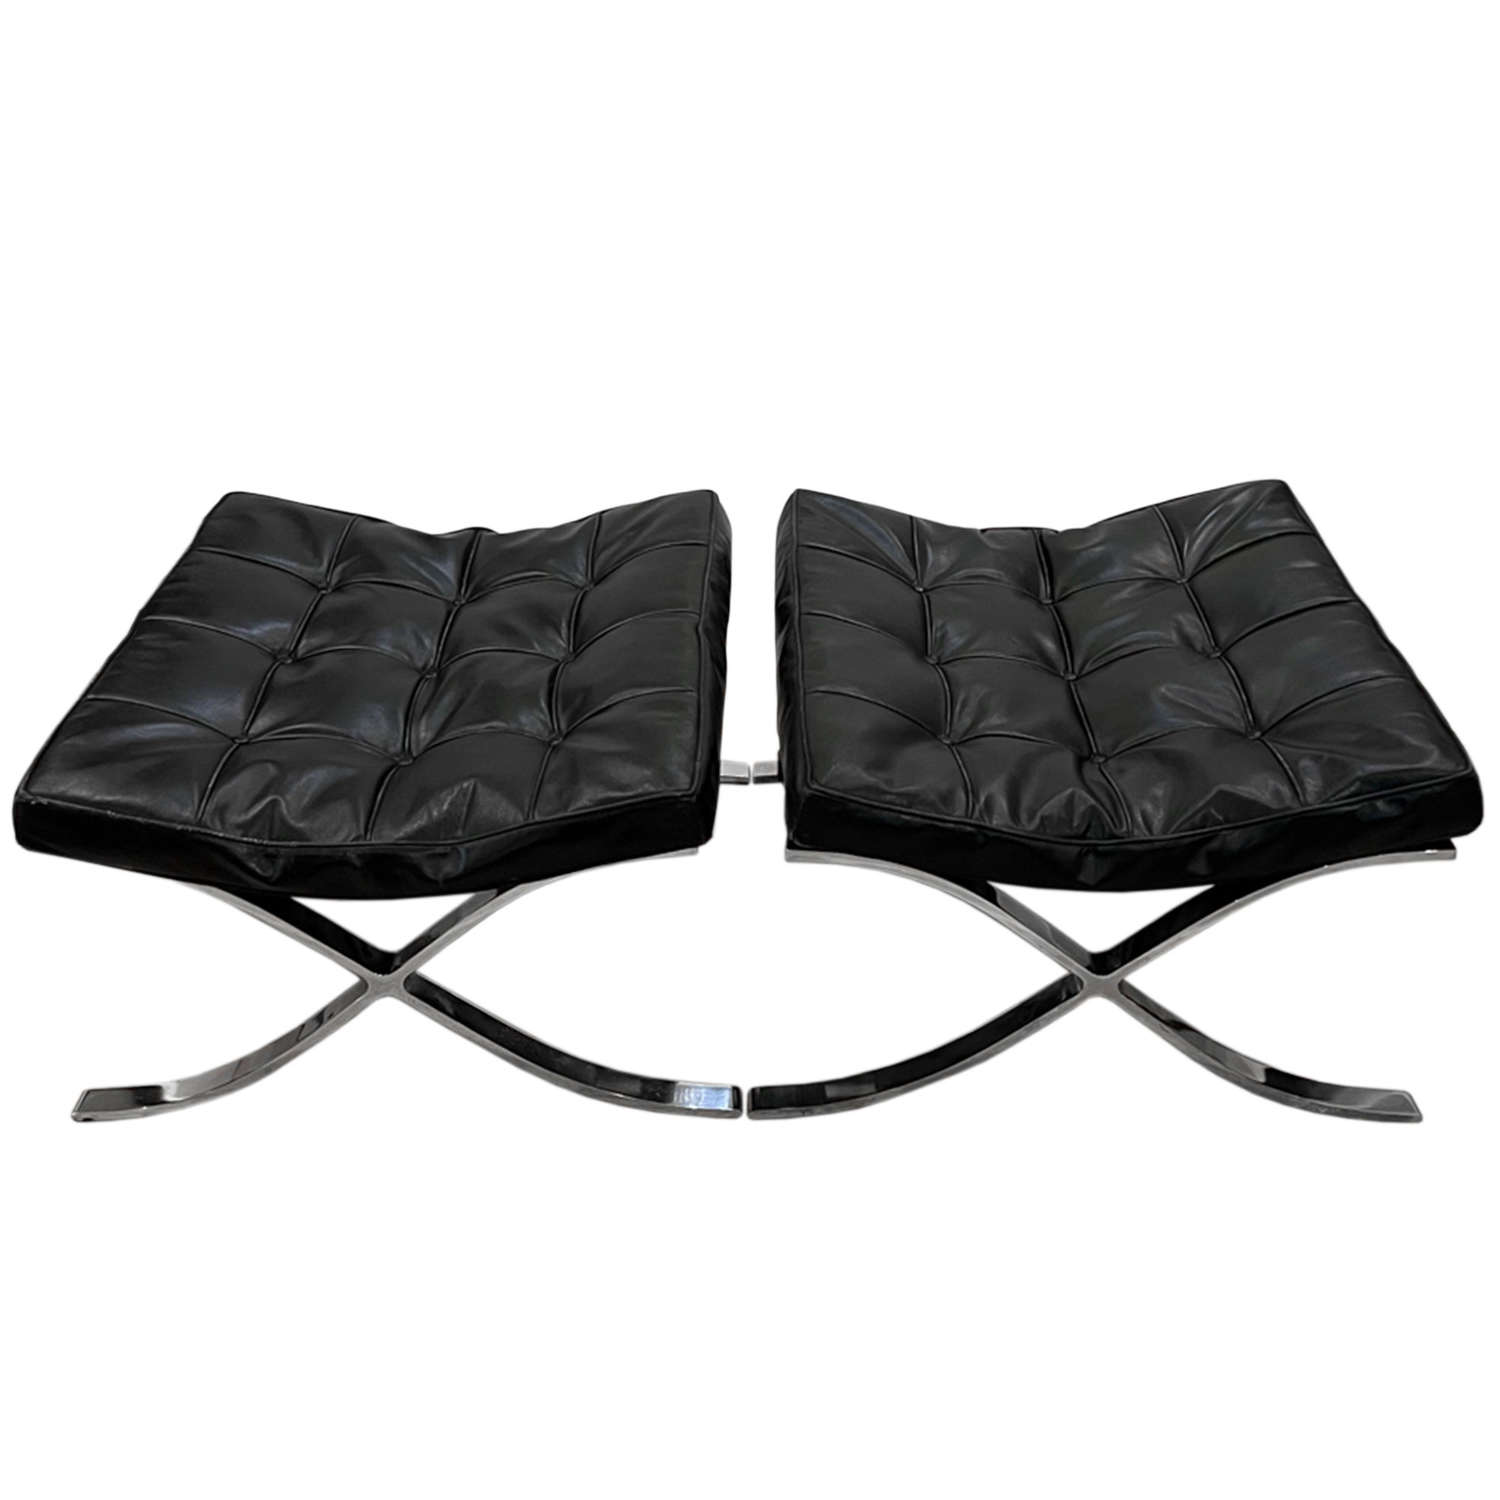 Pair of Barcelona Stools by Knoll